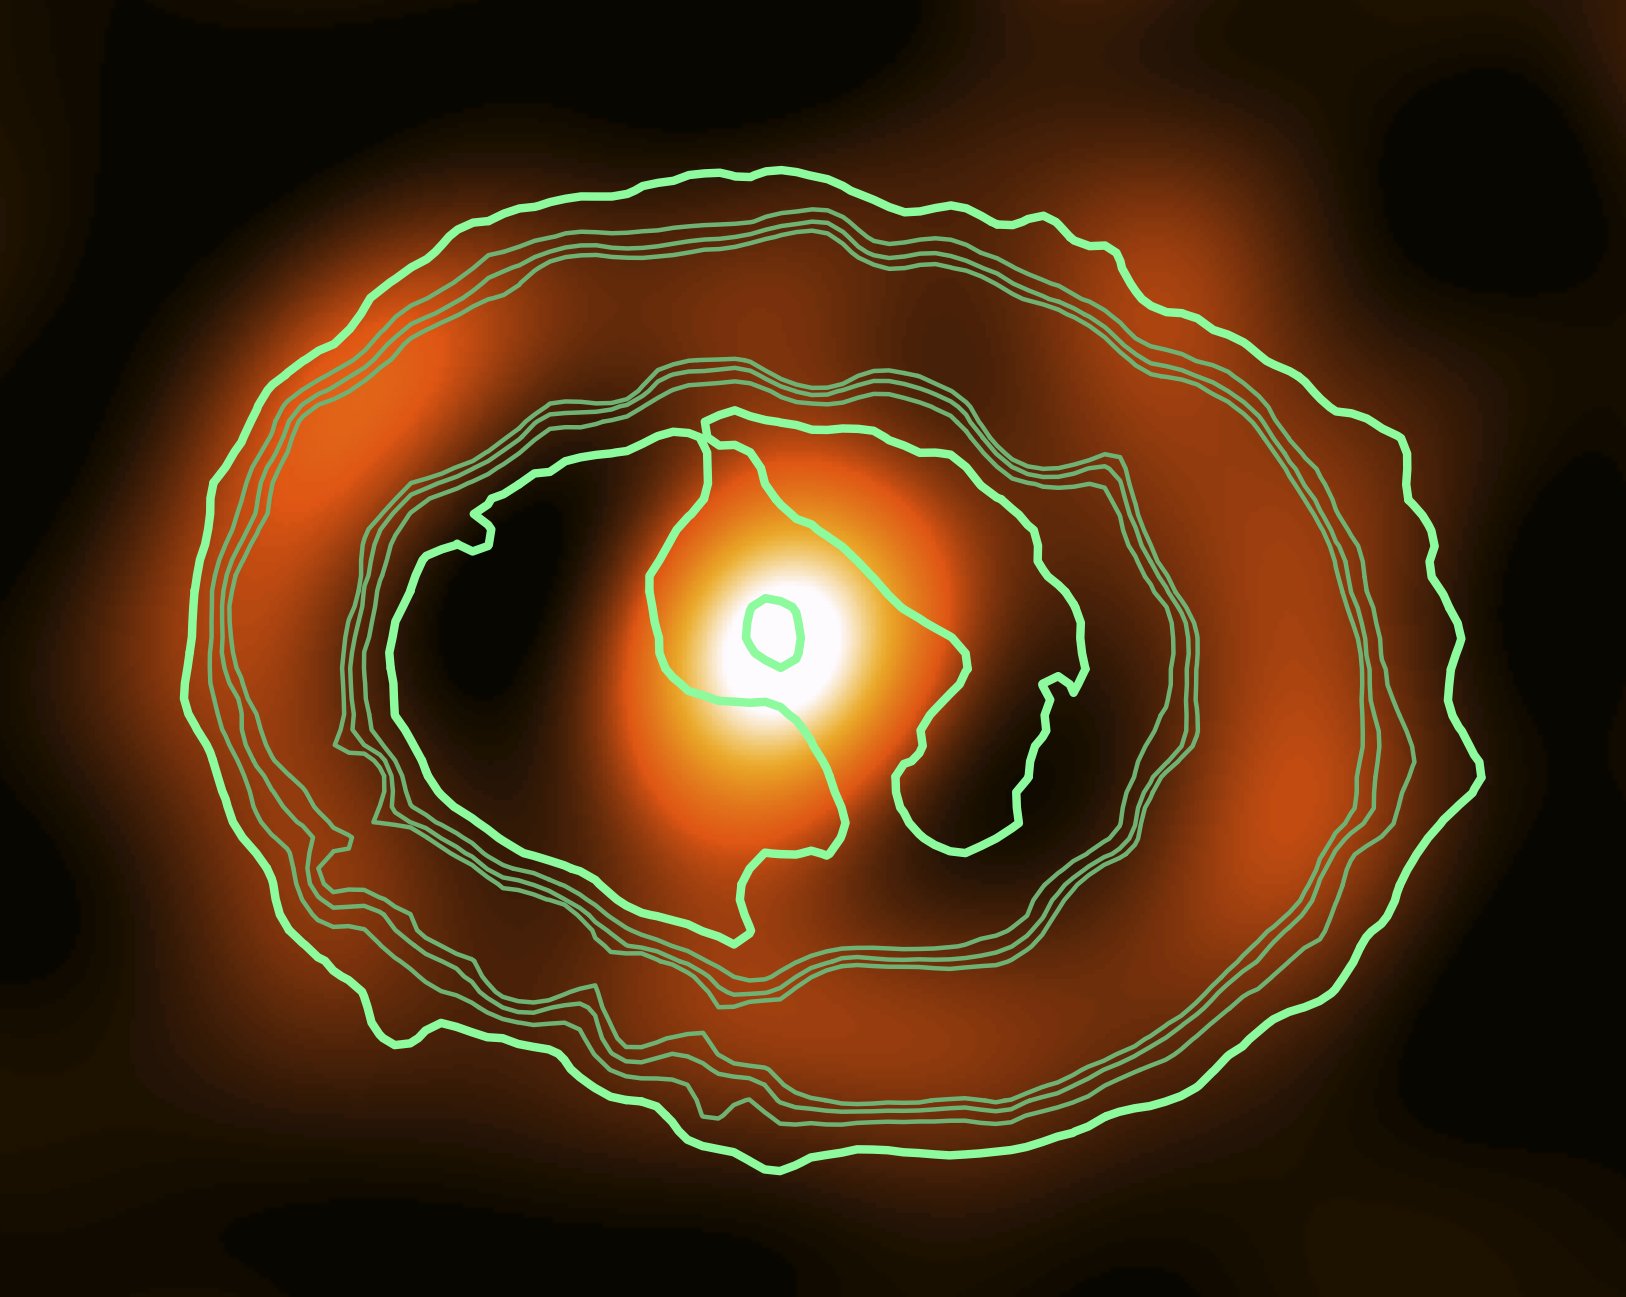 An outline of the equatorial ring and inner debris, as seen with the Hubble Space Telescope (green/blue contours), on top of ALMA observations of the remnant at 345 GHz (red/orange, with rendering). Credit: G. Zanardo, ICRAR-UWA